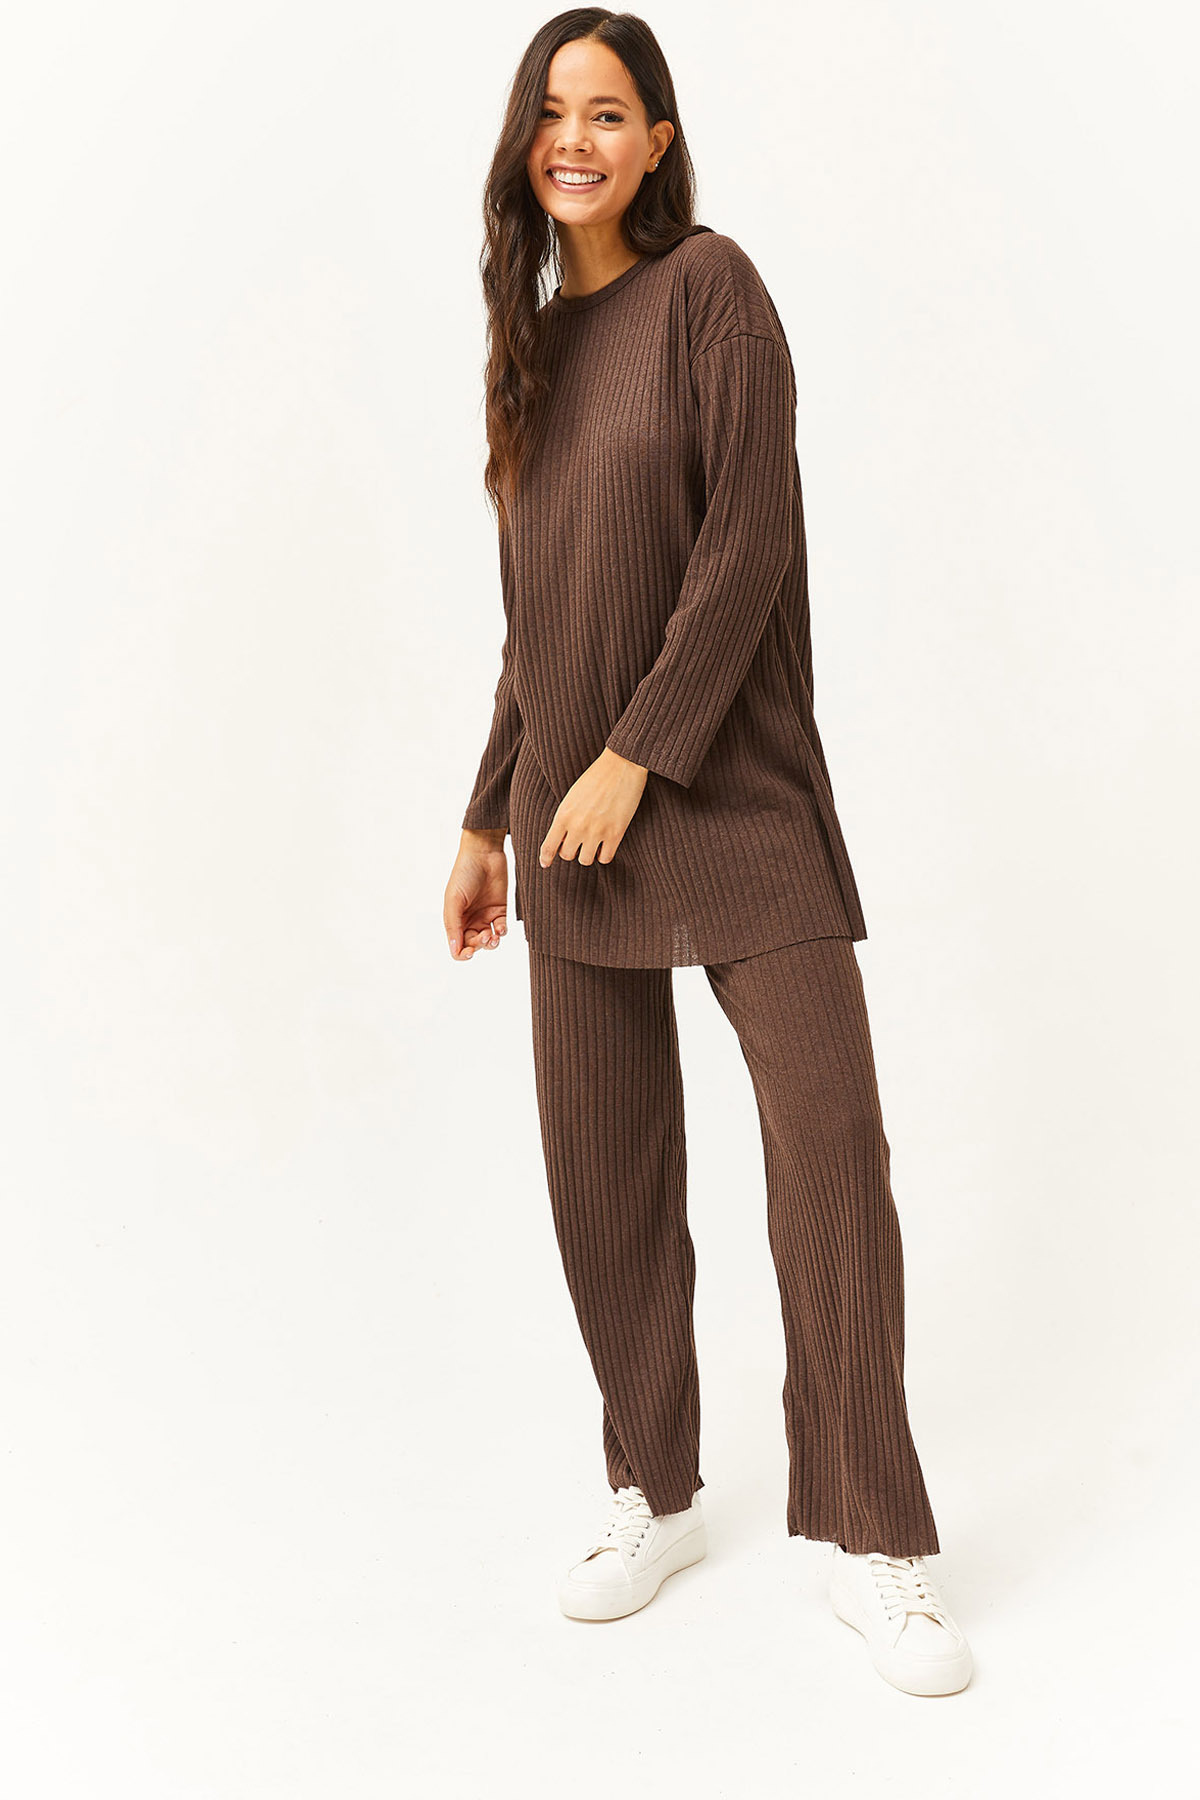 Olalook Women's Bitter Brown Top With Slit Blouse Bottom Palazzo Corduroy Suit